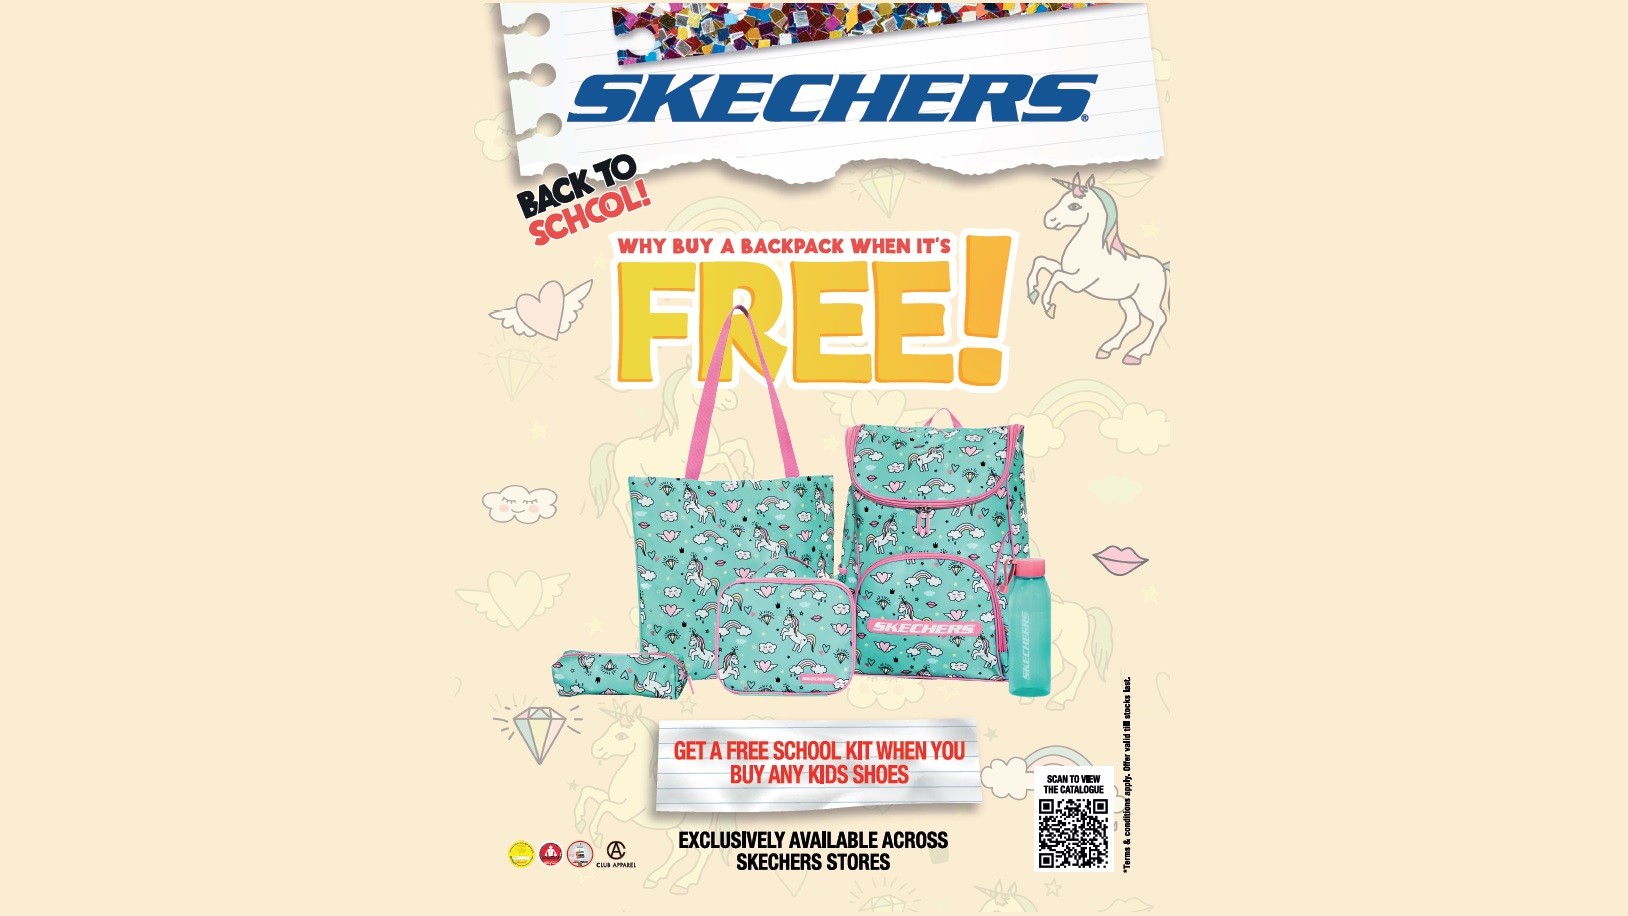 'Back to School' promo give away free school kits this August - The Filipino Times